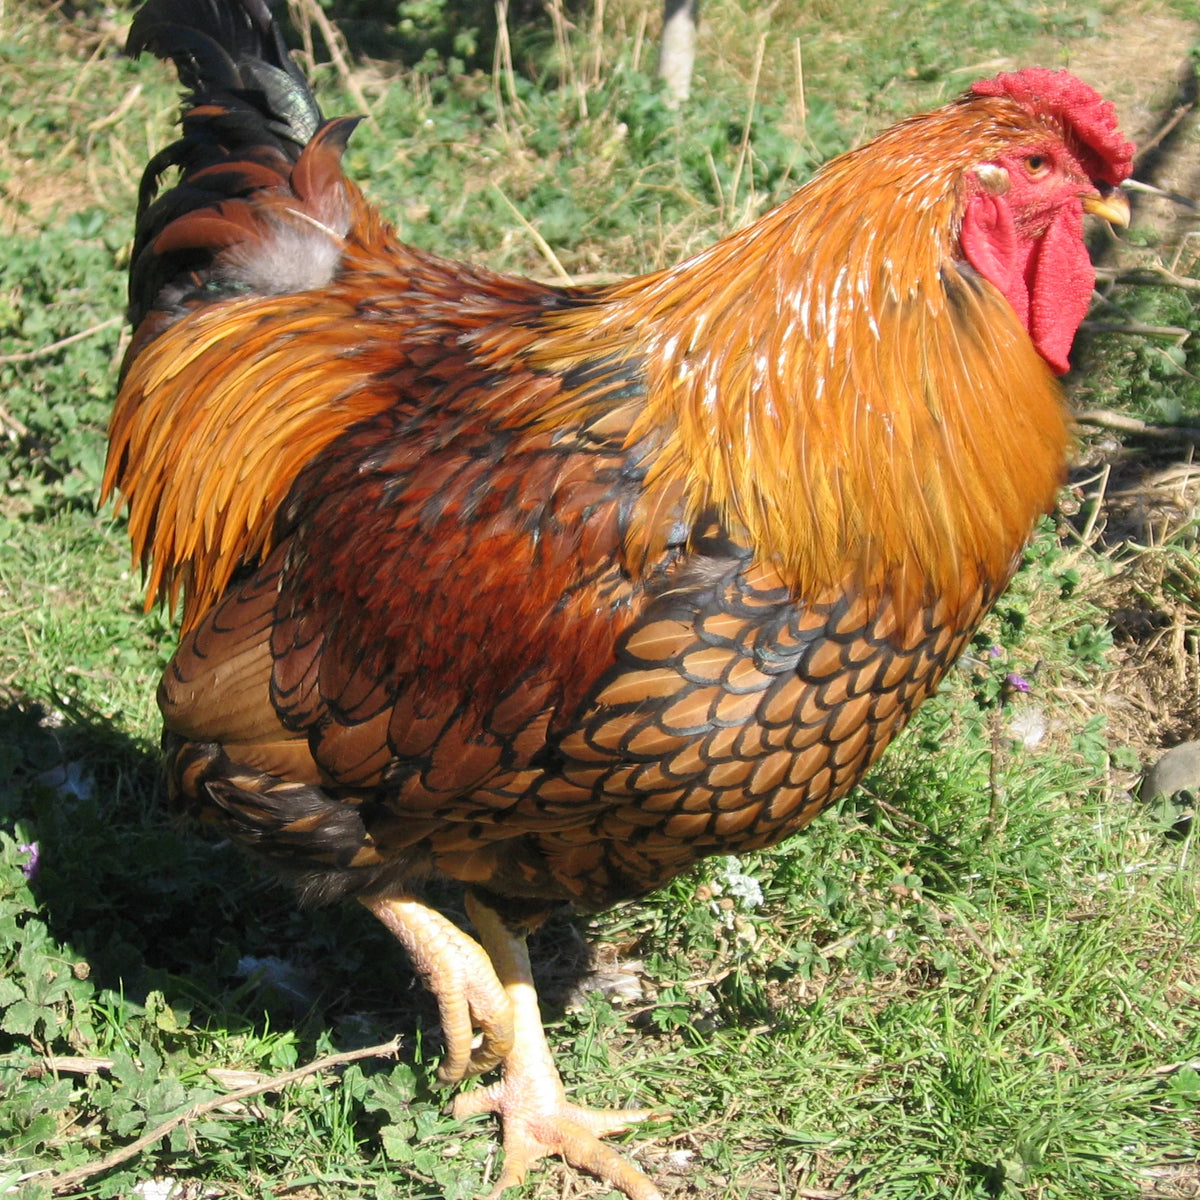 Spot the shiny, long, spiky saddle feathers on this young Gold Laced Wyandotte rooster